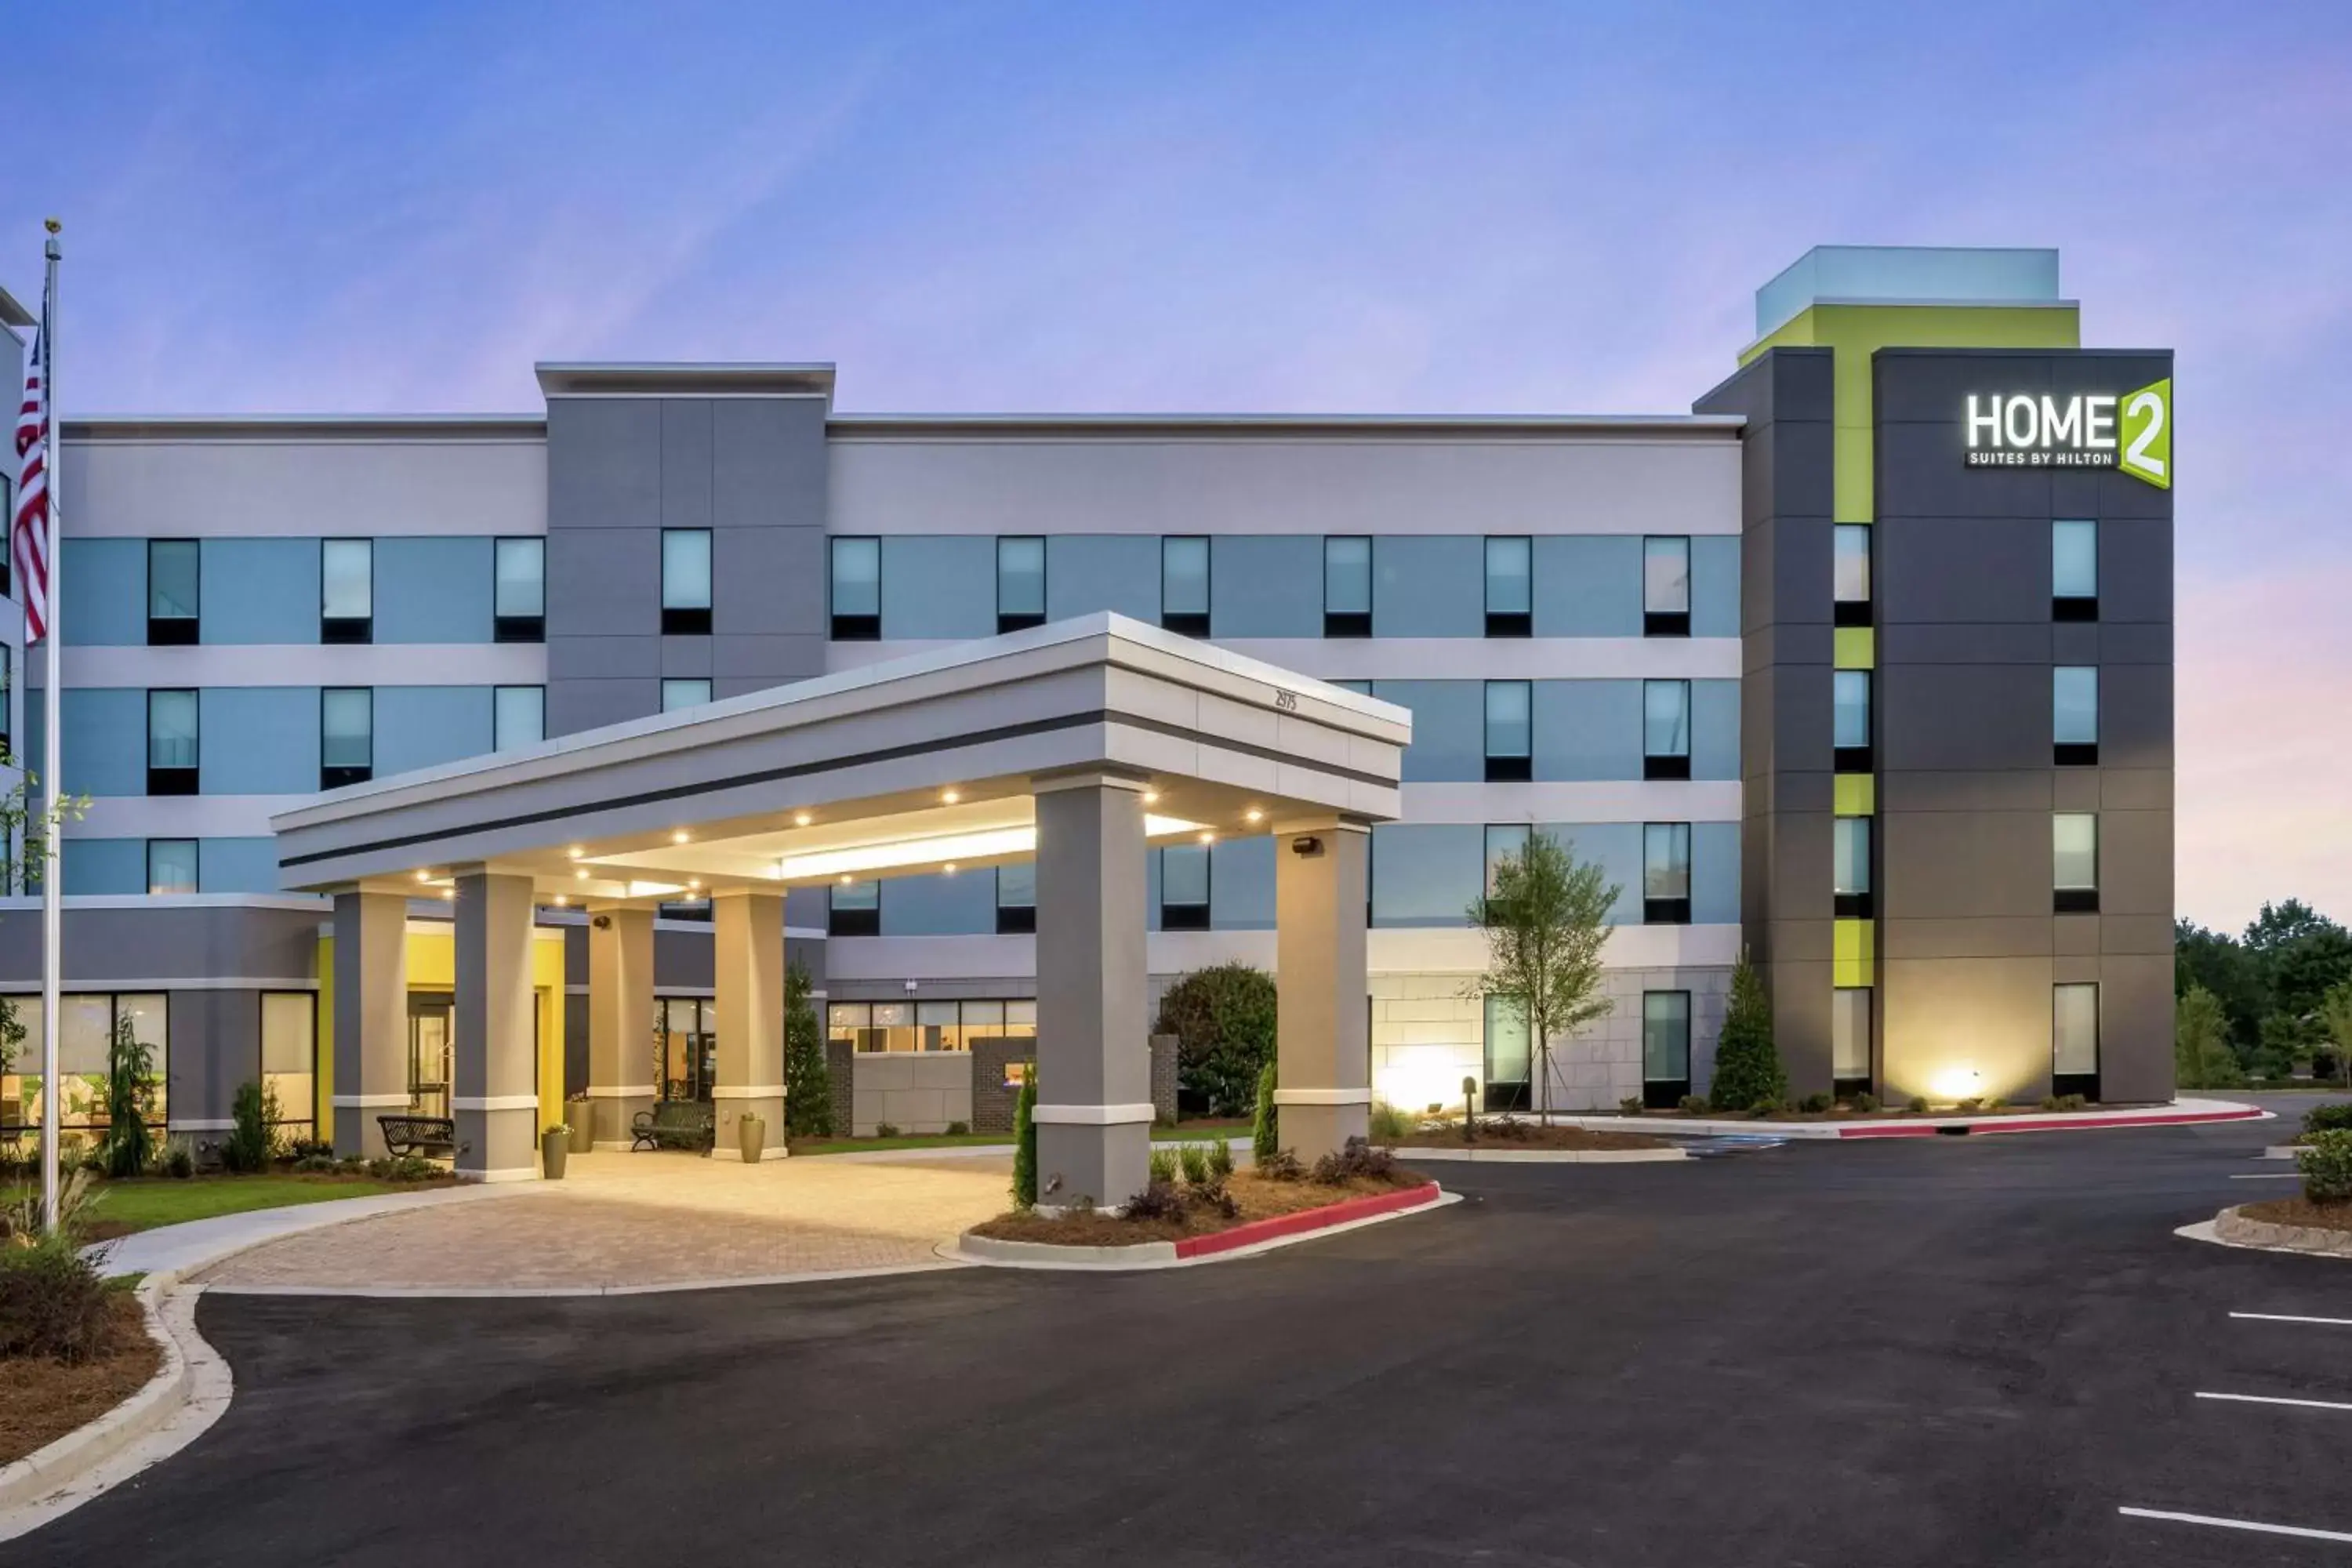 Property Building in Home2 Suites By Hilton Atlanta Nw/Kennesaw, Ga